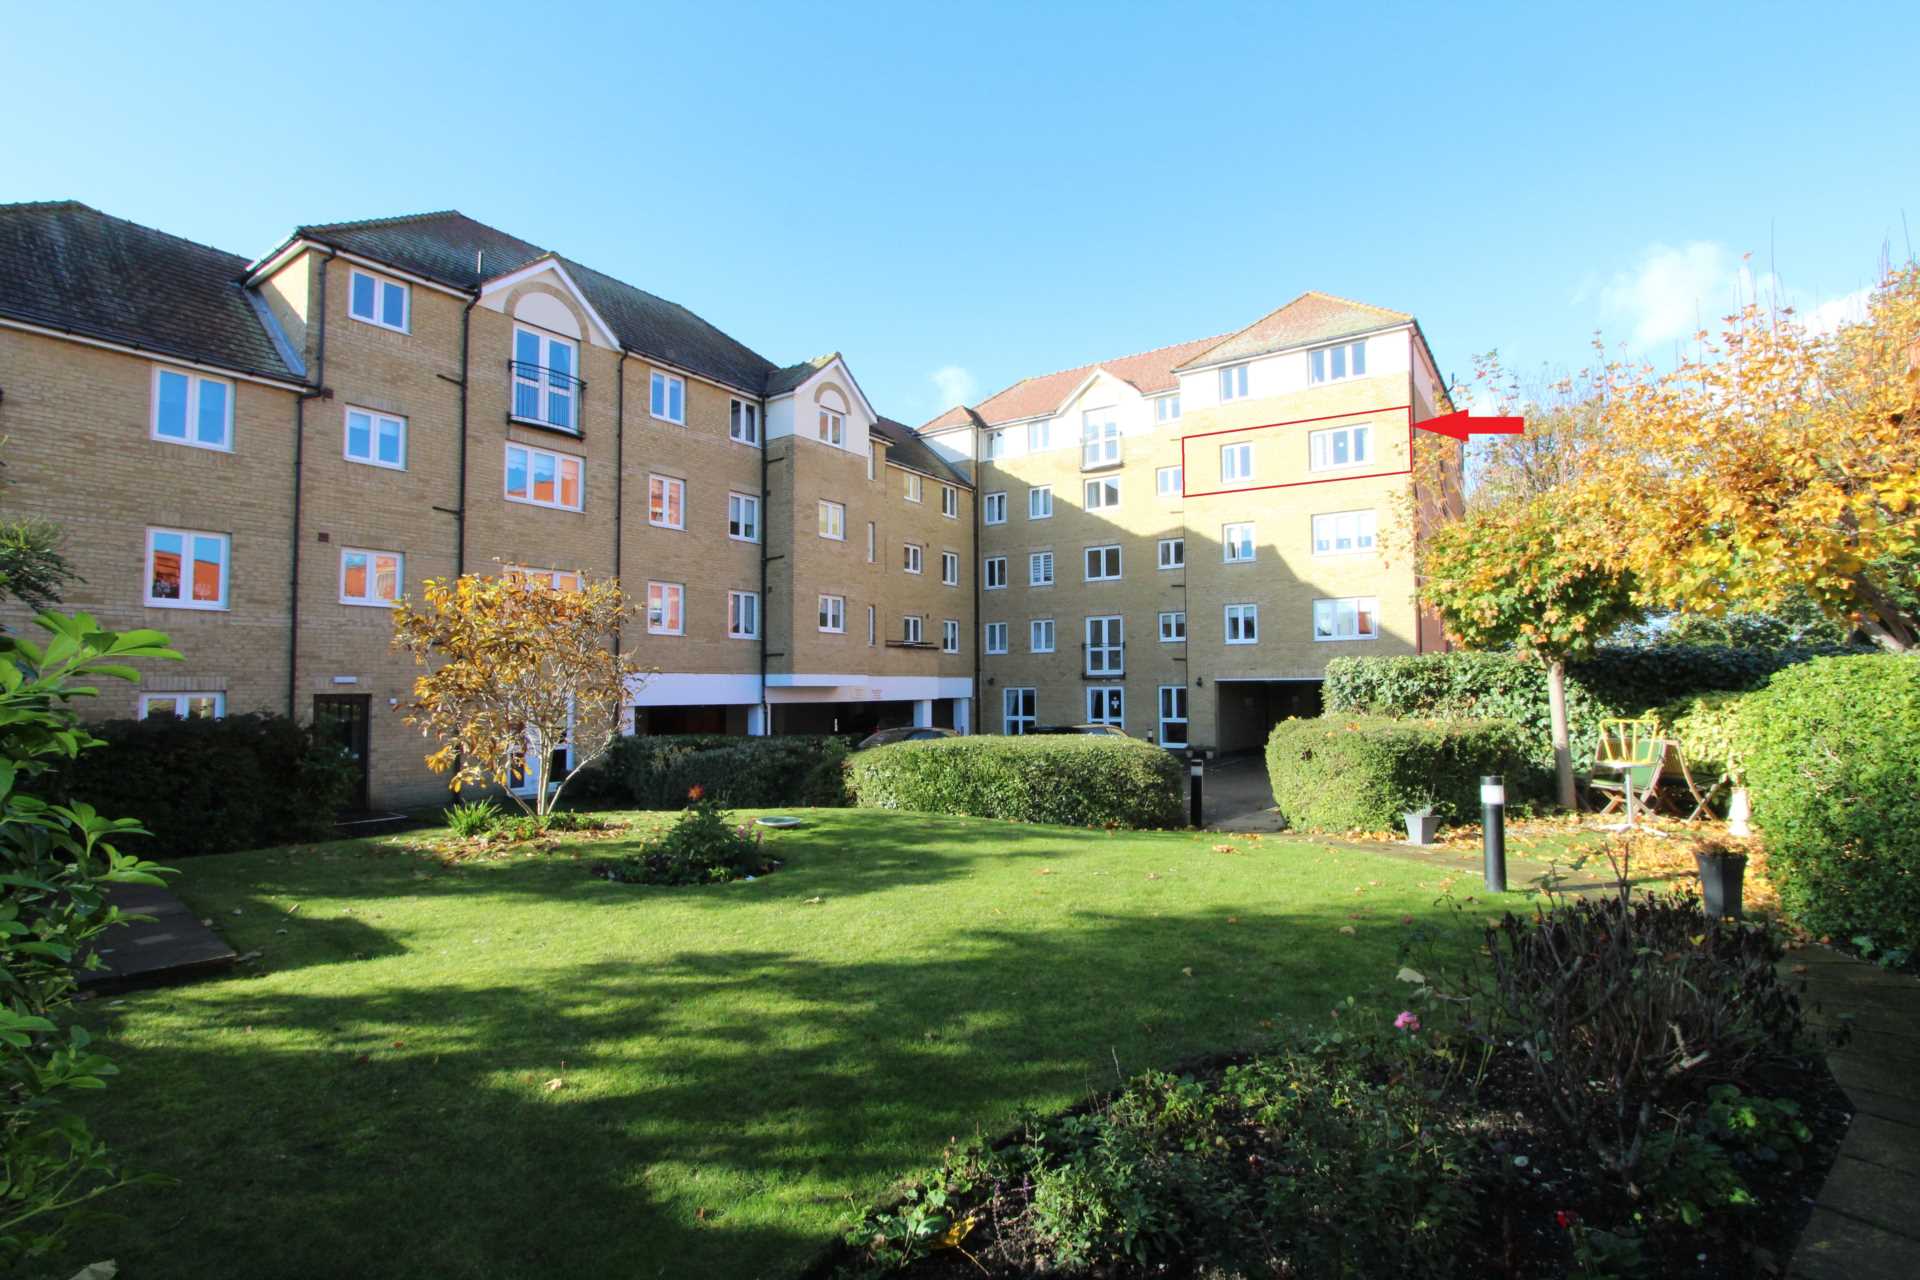 Retirement flat close to Town Centre, Image 1